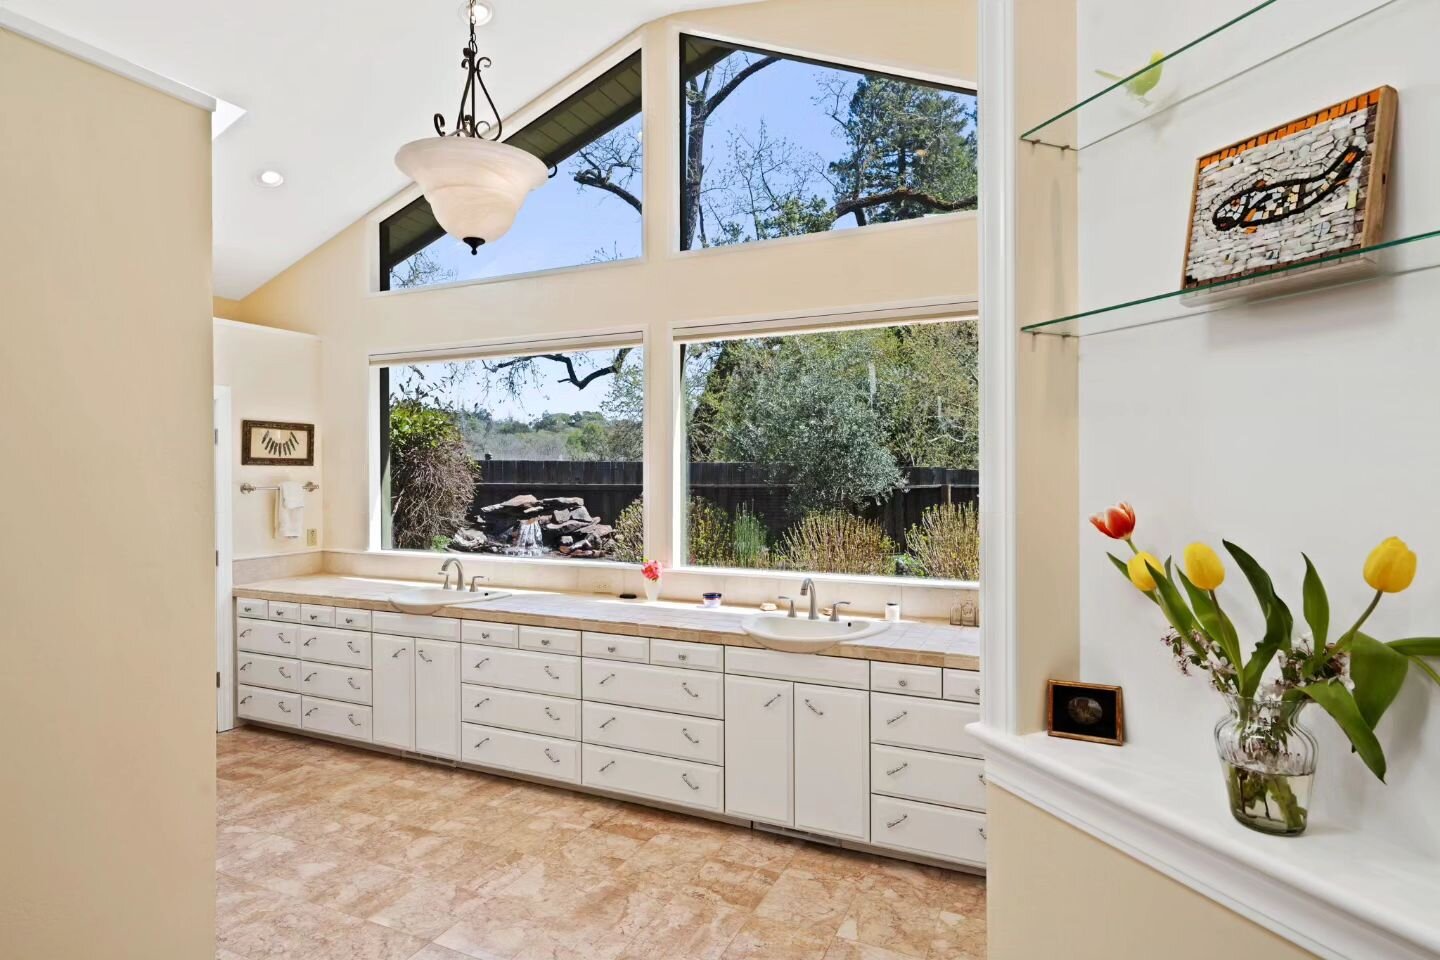 We love a house with big windows to add to indoor-outdoor living ☀️

This magical Chalk Hill compound has it all-
▪️ Privacy
▪️Stunning 180-degree views
▪️3 full residences
▪️Potting shed &amp; greenhouse
▪️Asian inspired tea house
▪️Lush gardens &am